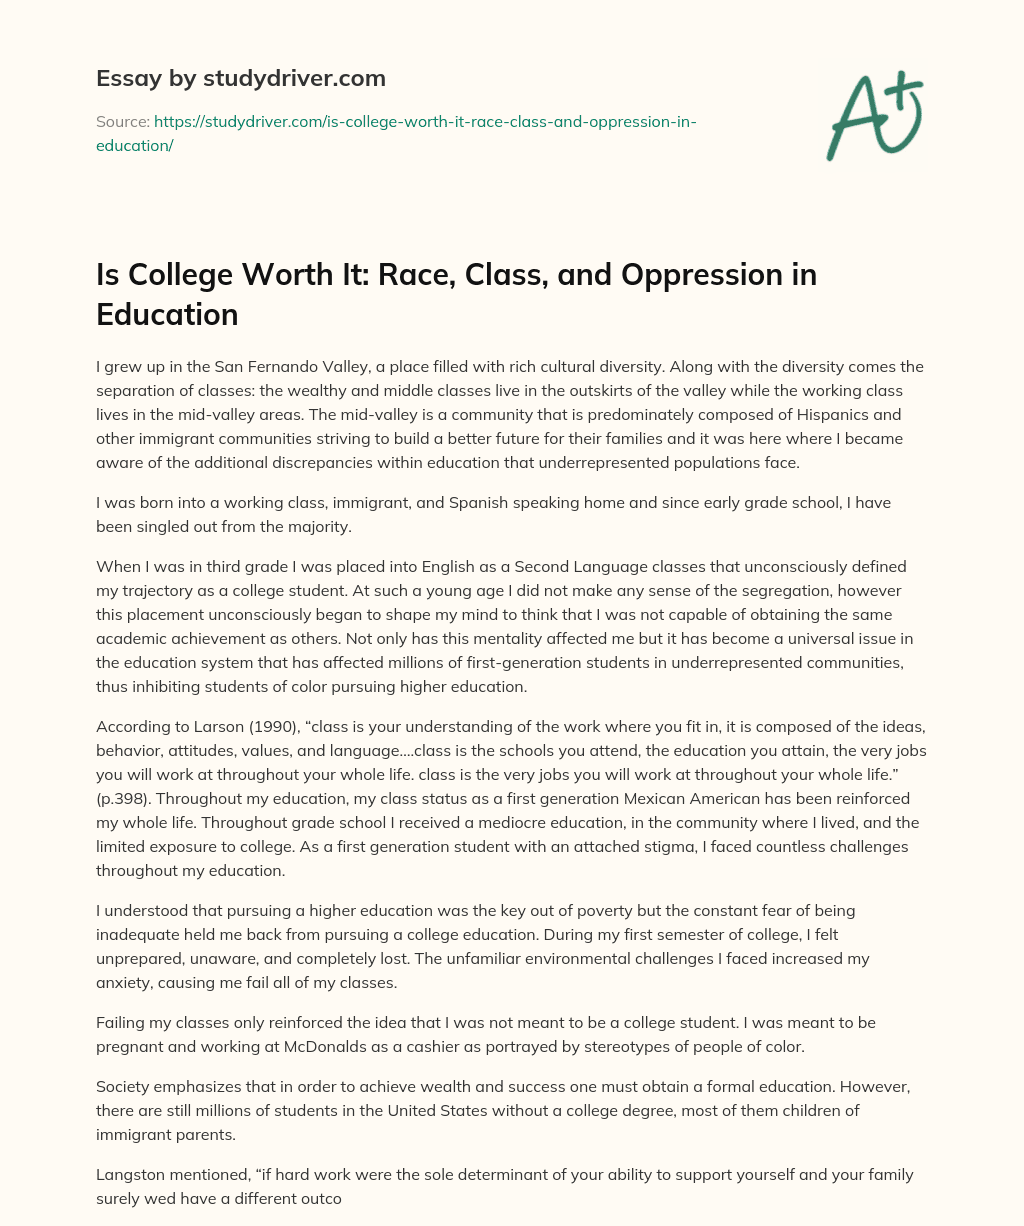 Is College Worth It: Race, Class, and Oppression in Education essay